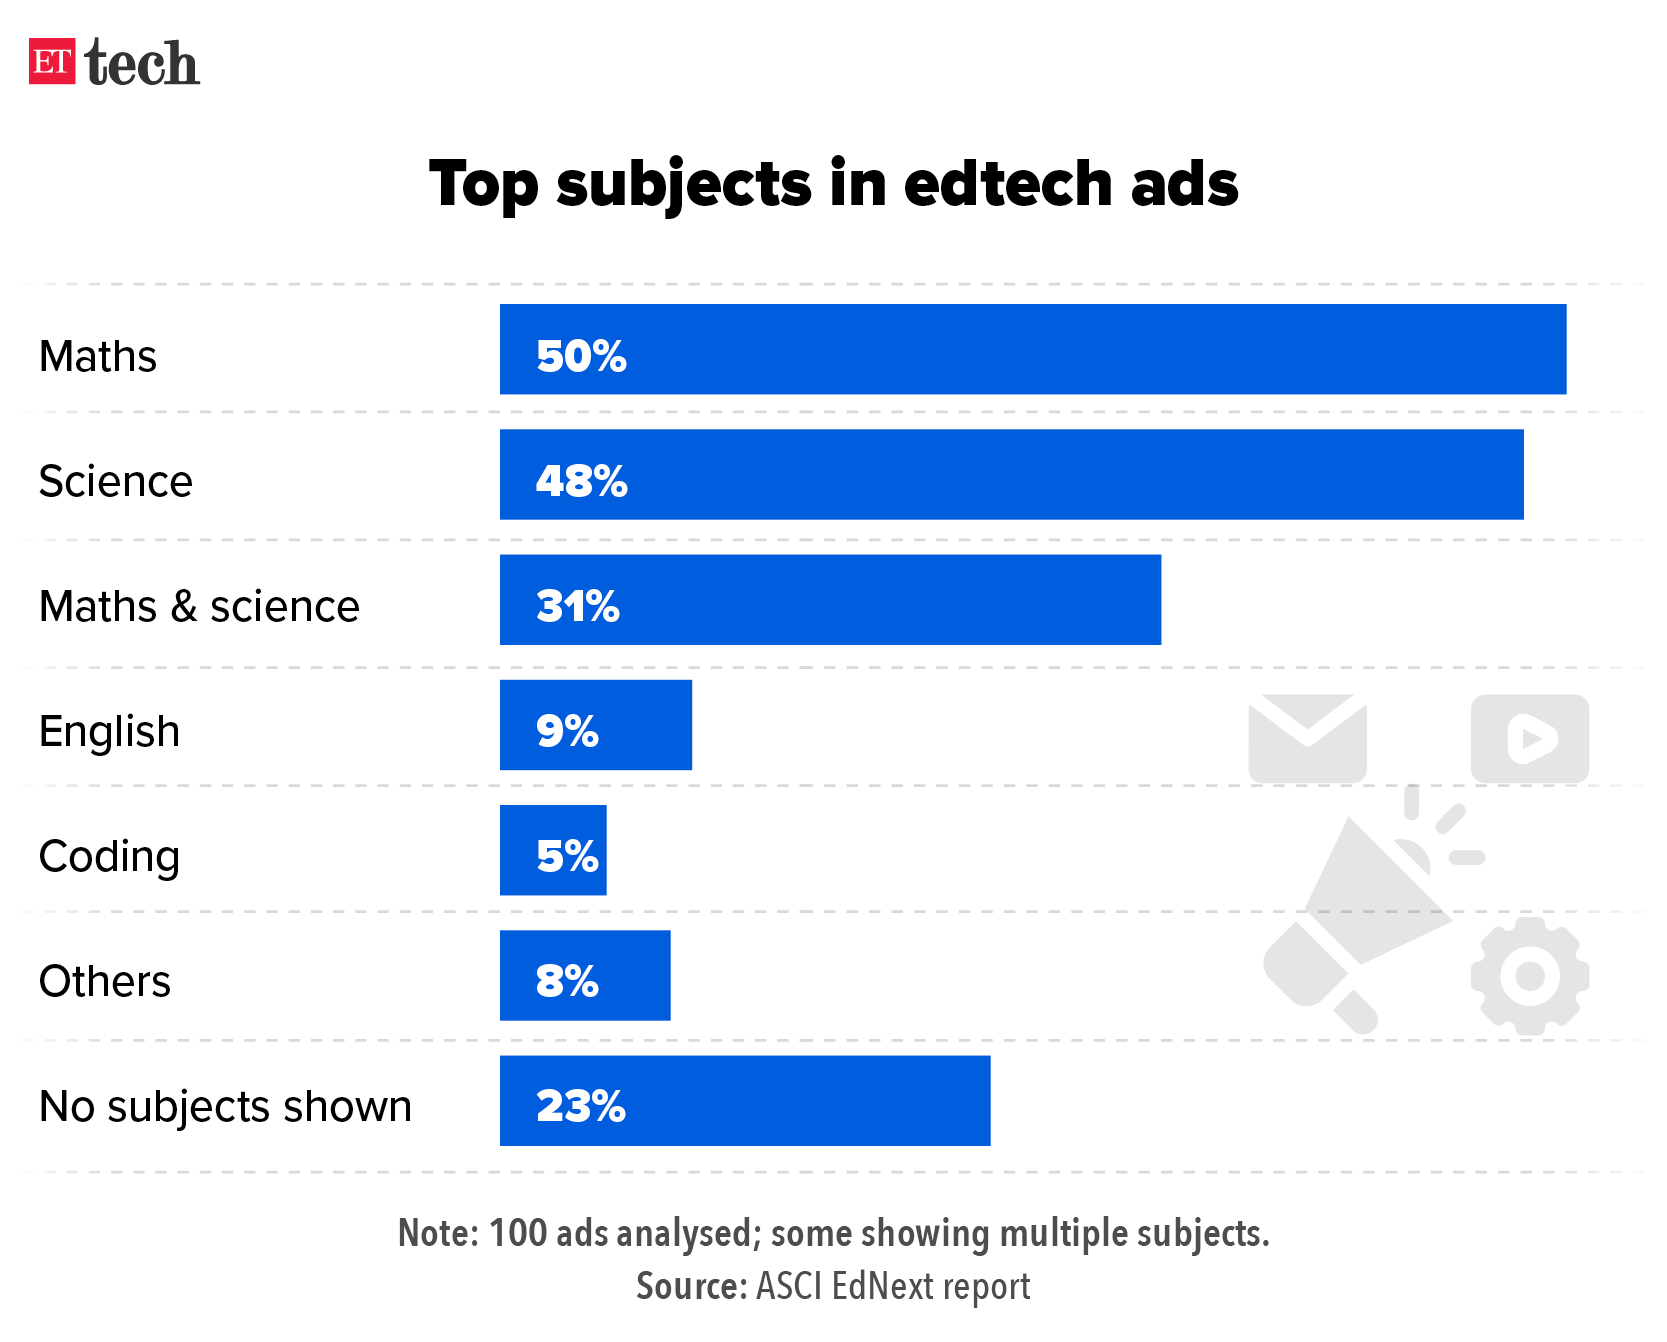 Top subjects in edtech ads